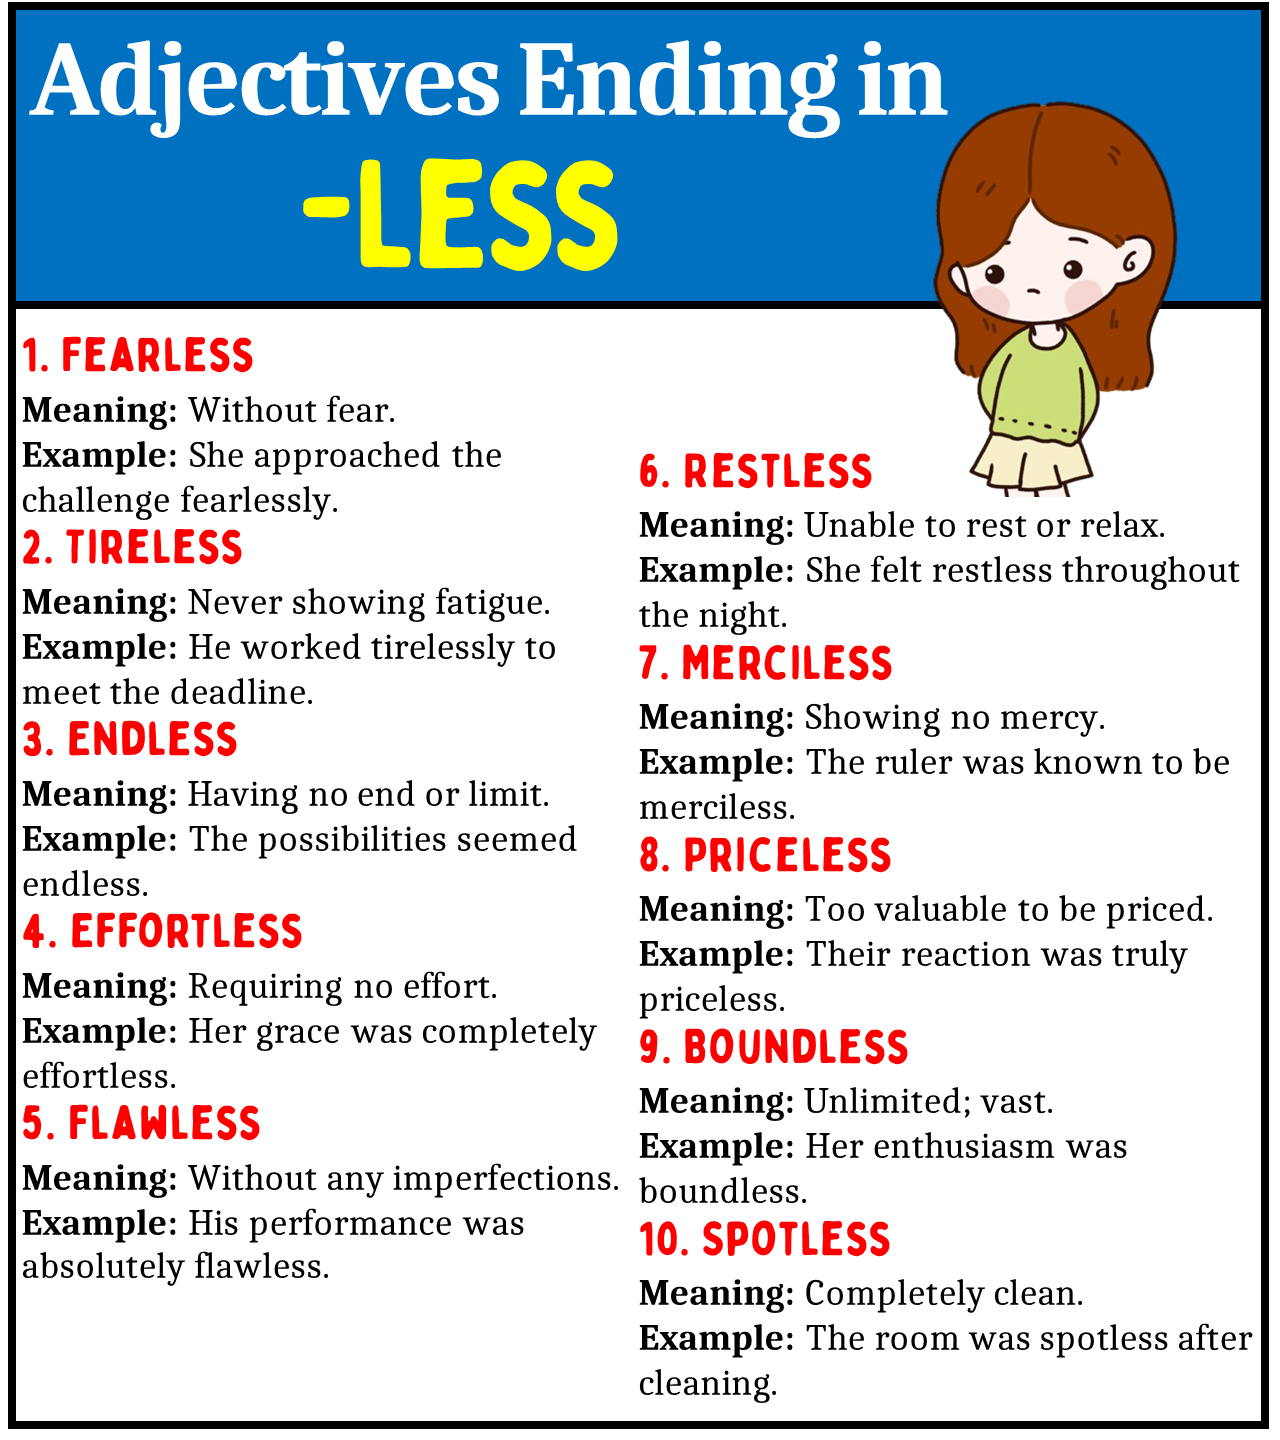 Adjectives Ending in Less